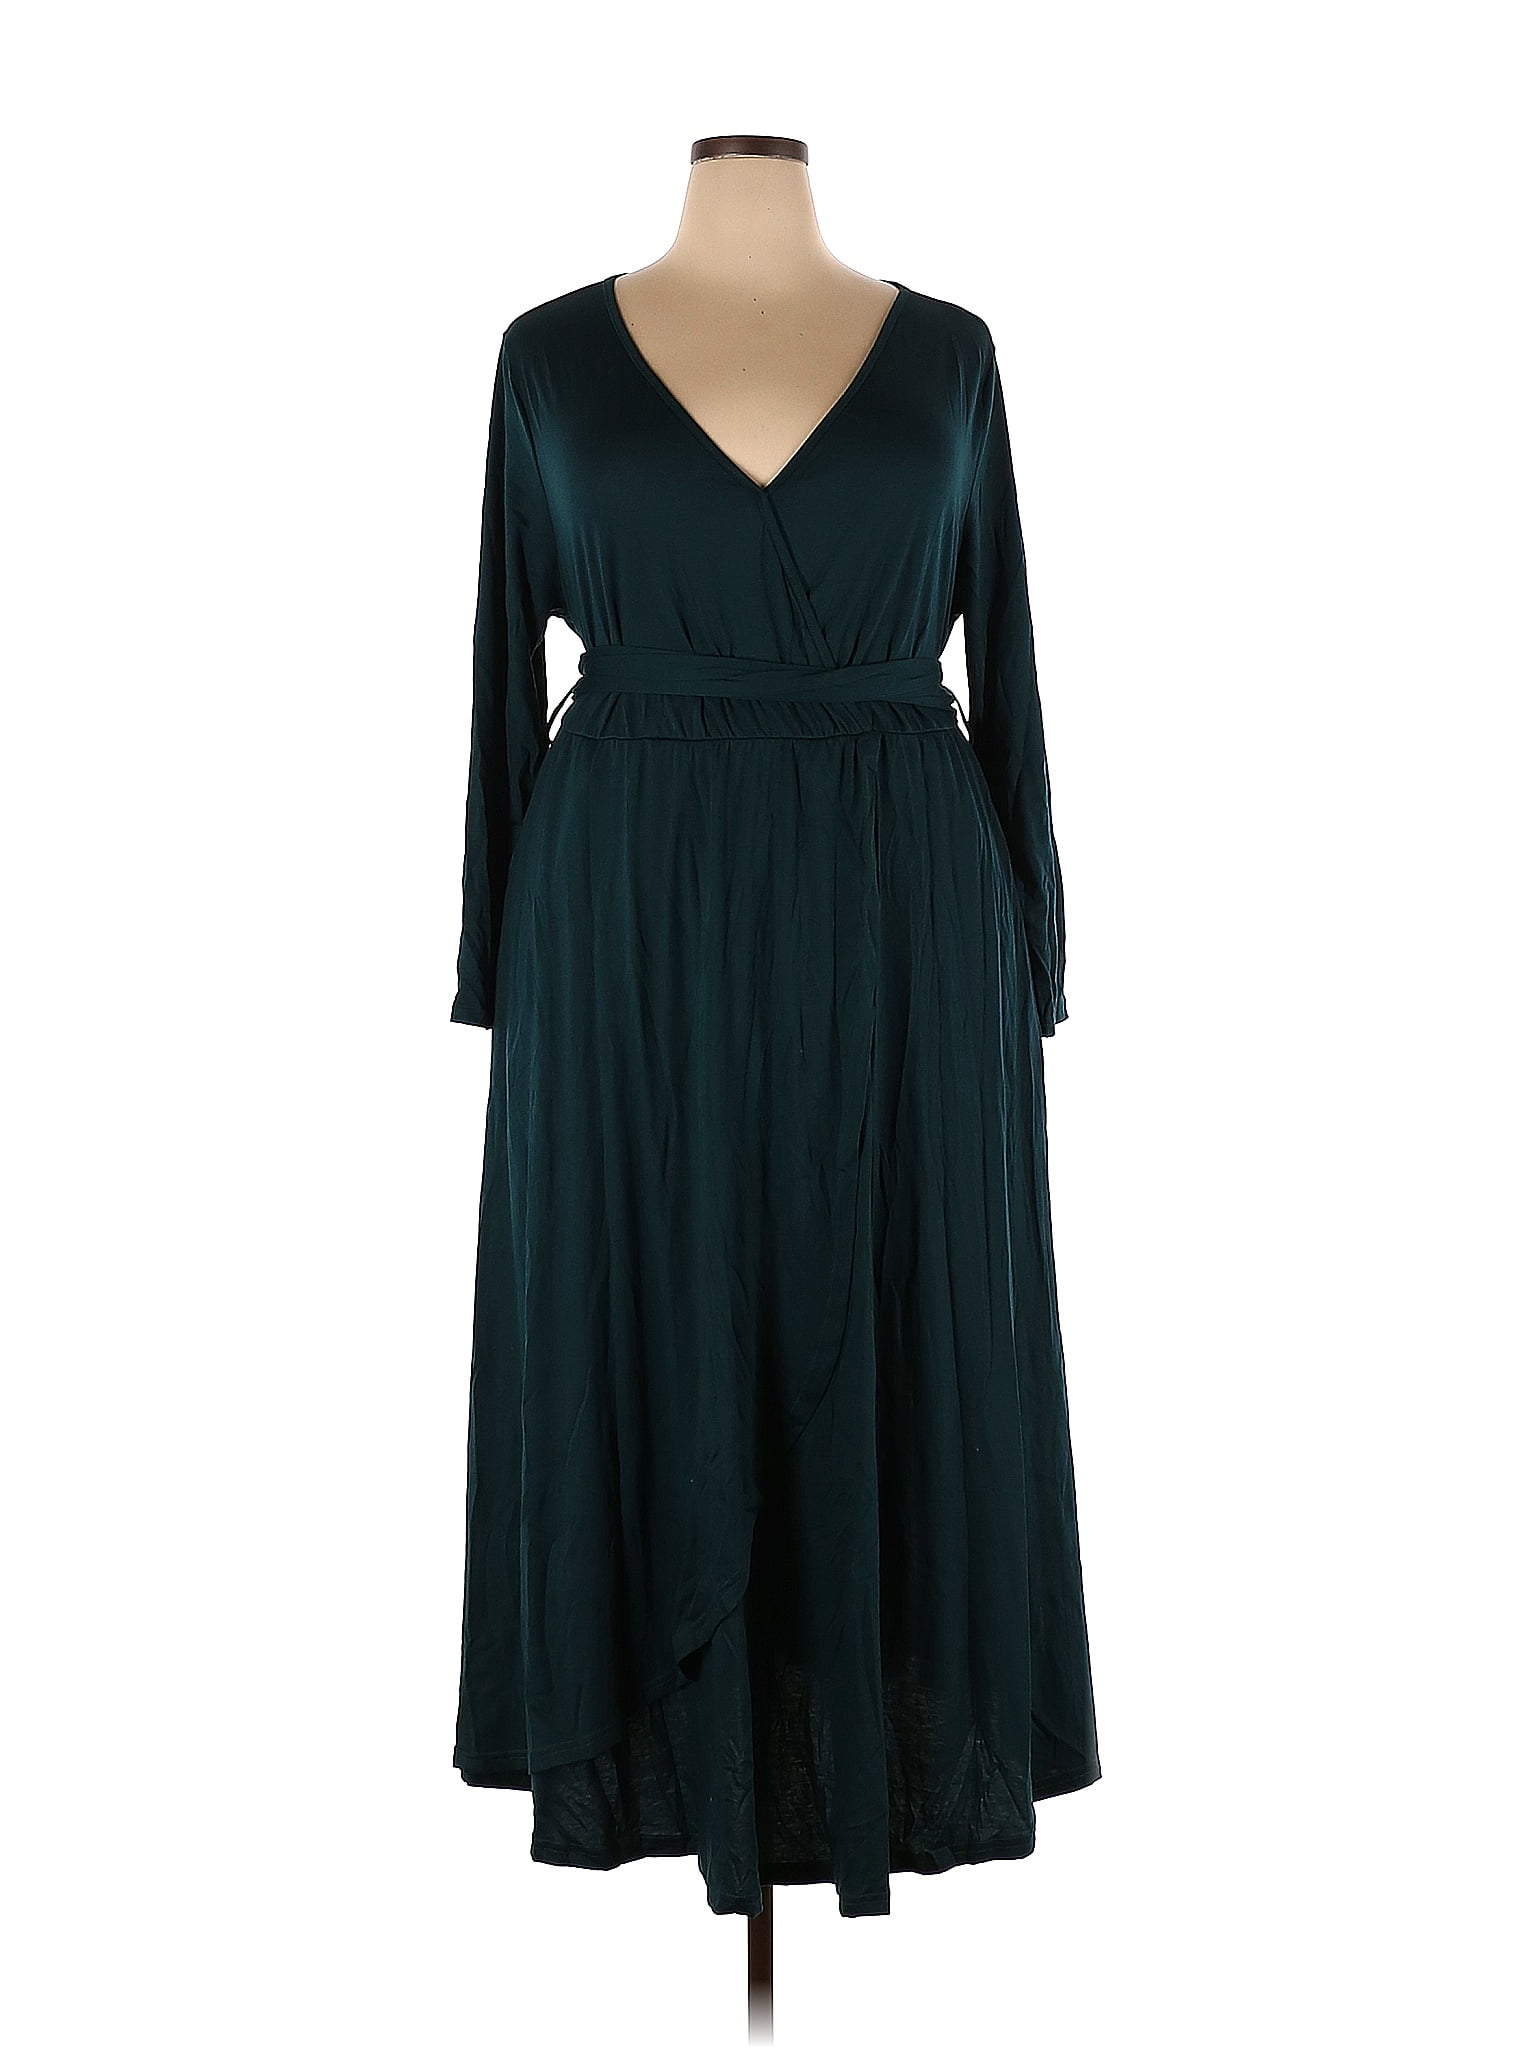 BLOOMCHIC Solid Green Casual Dress Size 18 - 20 (Plus) - 49% off | thredUP